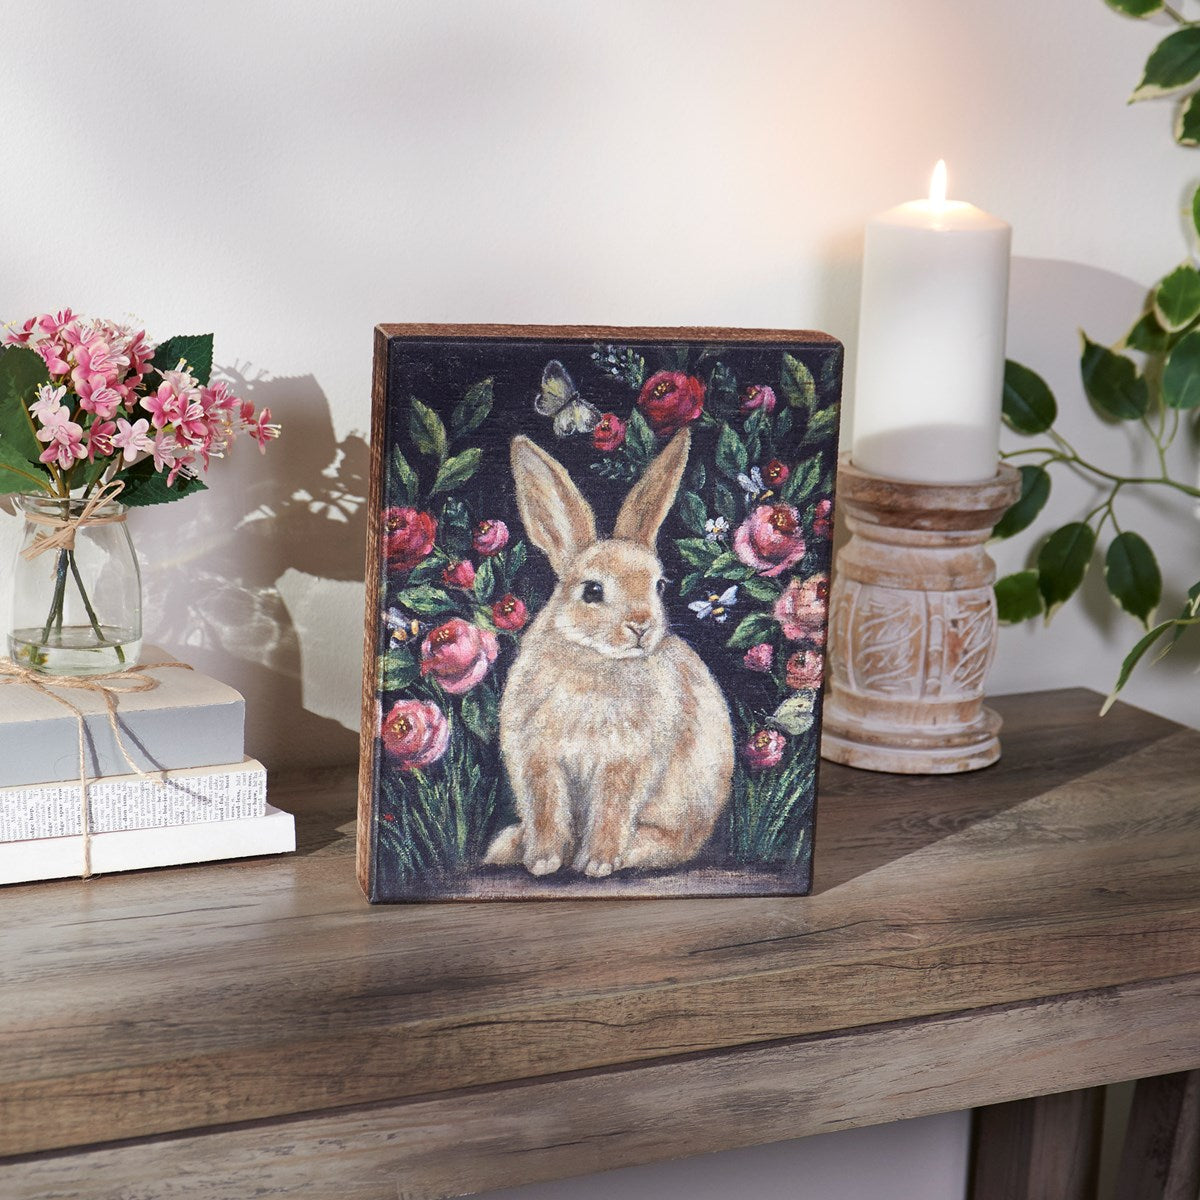 Woodland Bunny 10" Wooden Box Sign